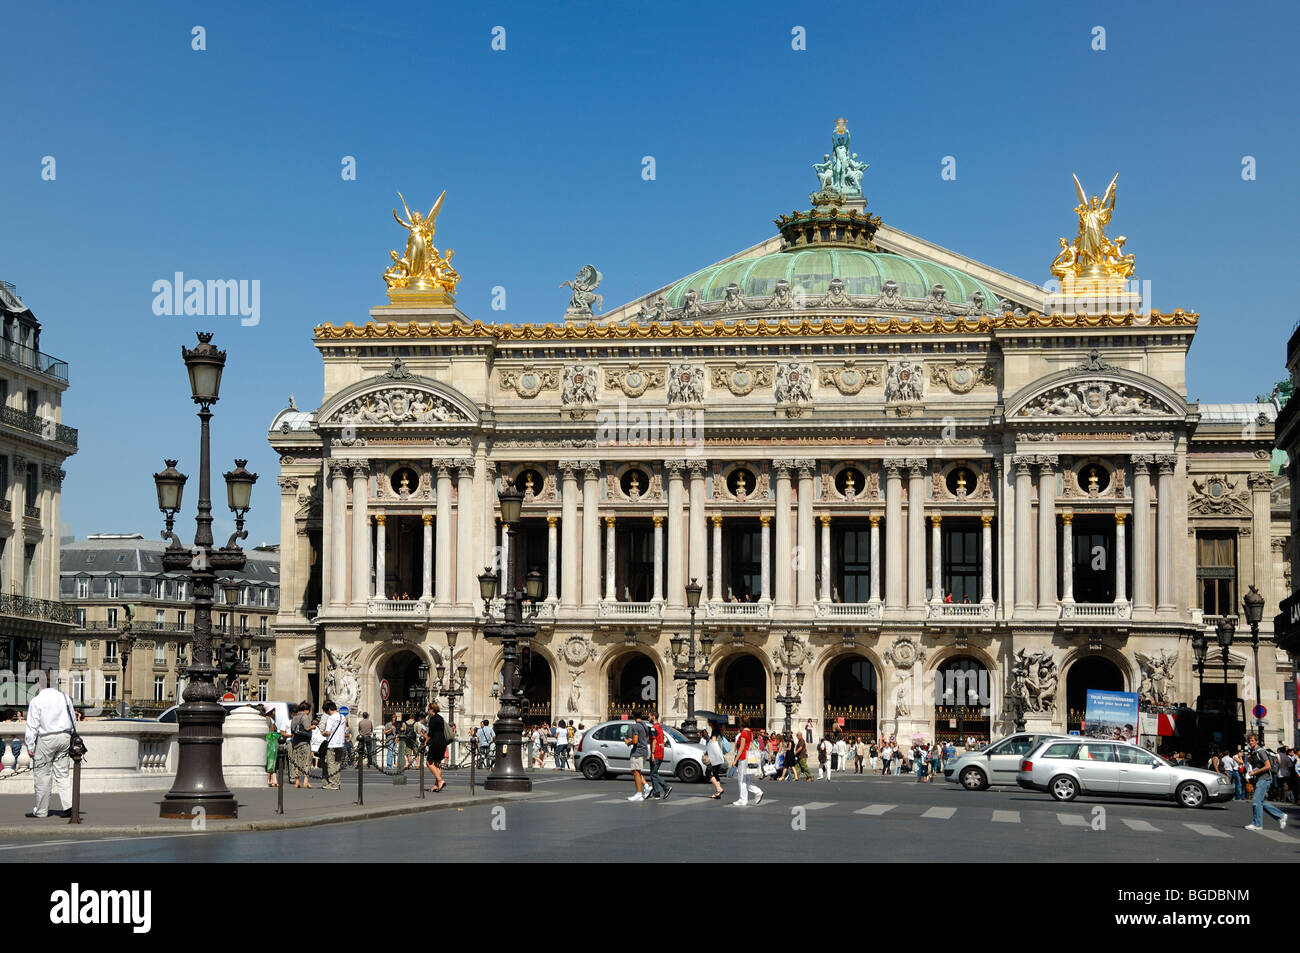 Tourists & Traffic Outside the Paris Opéra, Palais Garnier, Opéra de Paris or Opéra Garnier, Paris, France Stock Photo